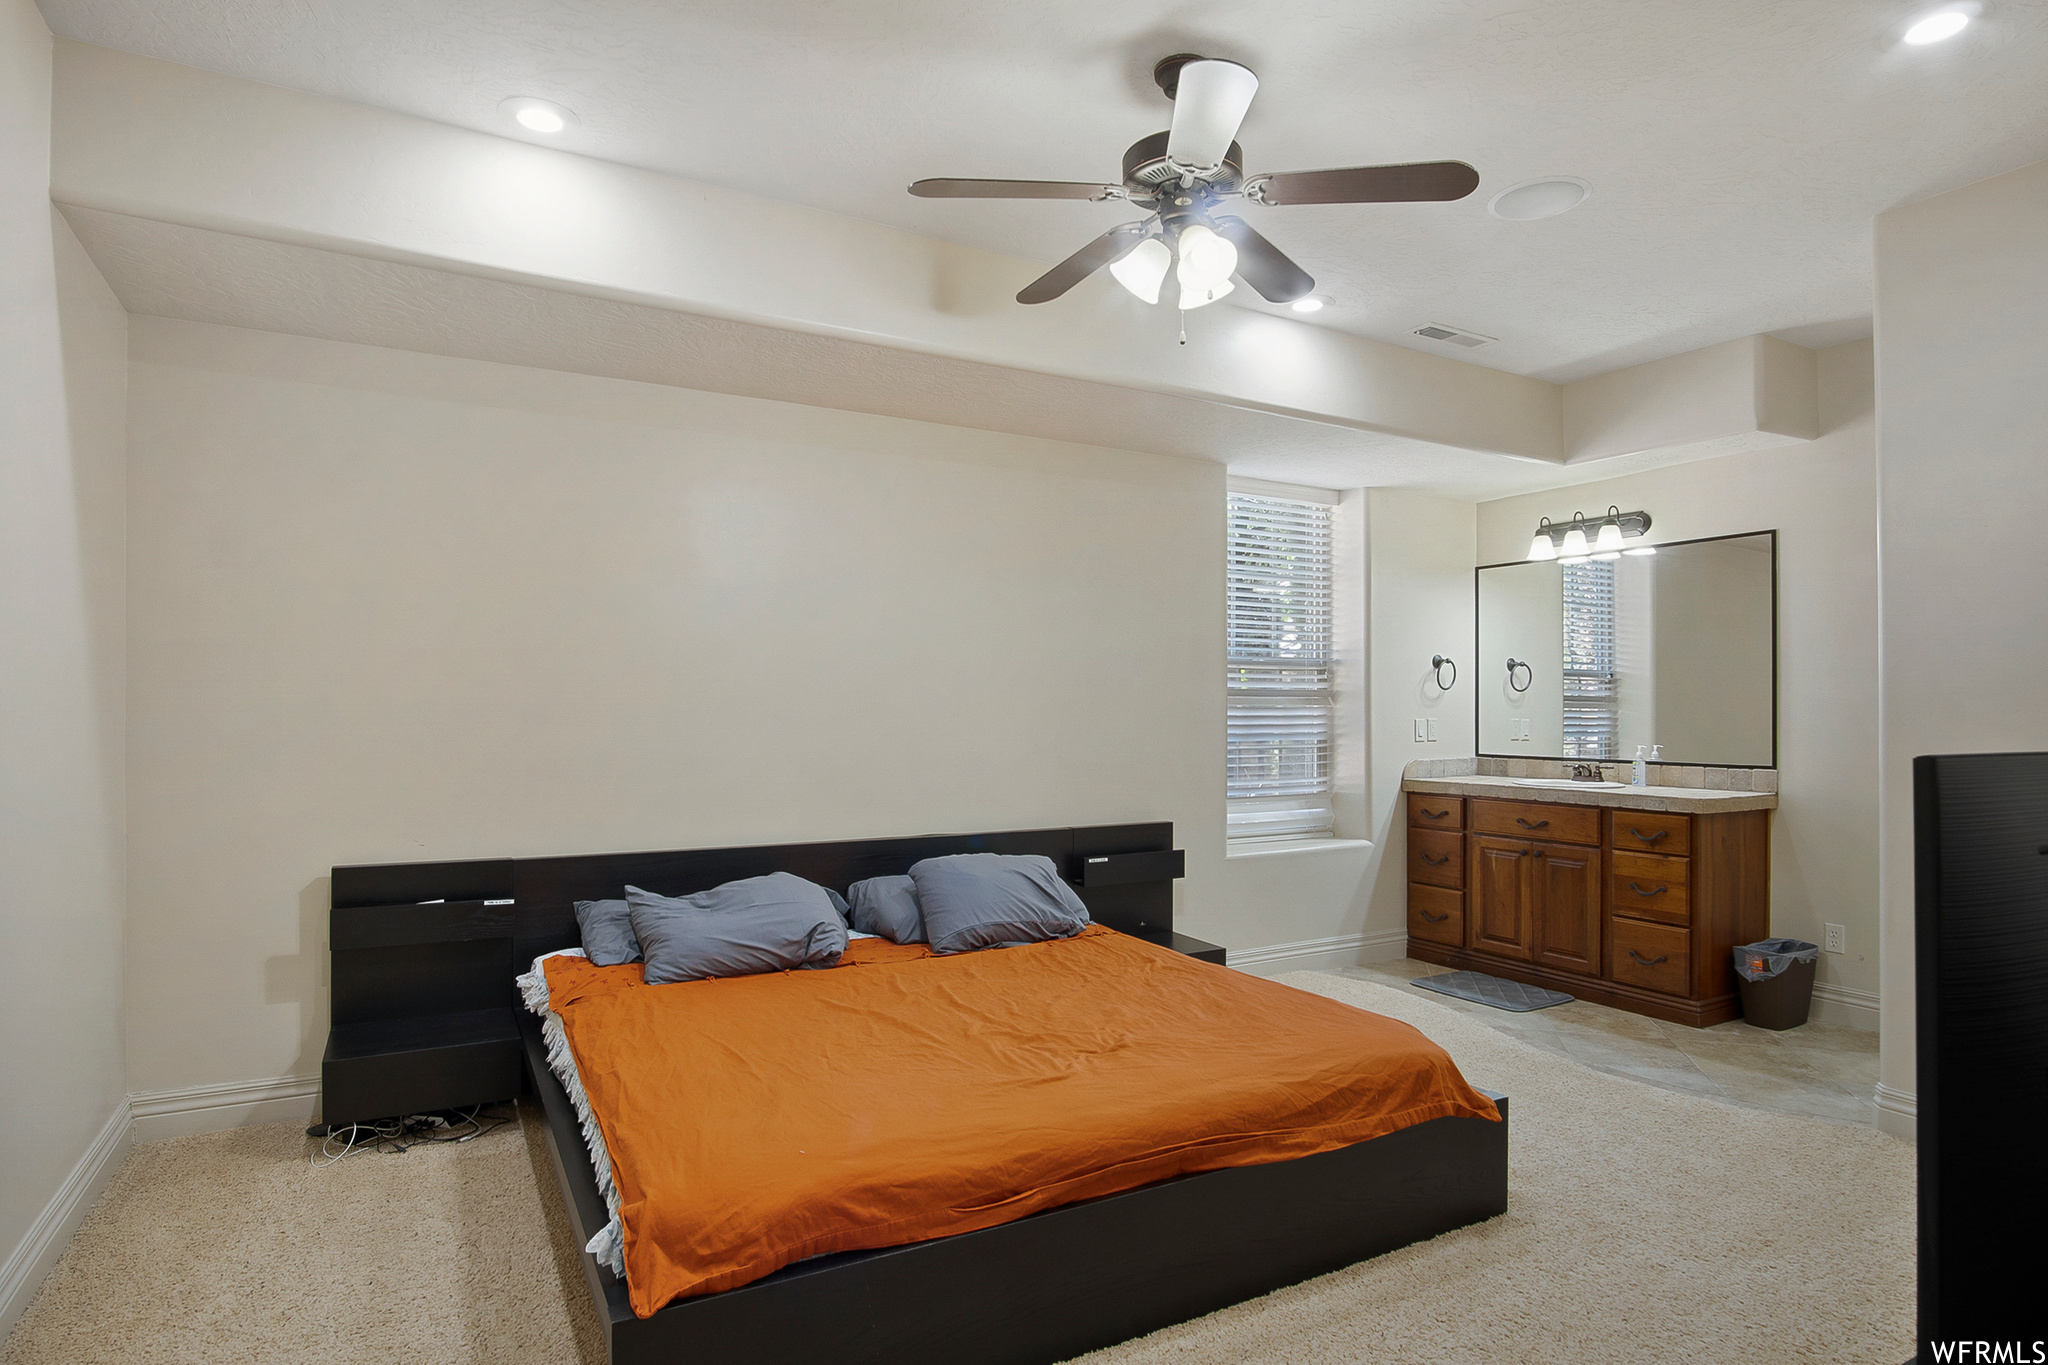 Carpeted bedroom with a ceiling fan and natural light, full bath